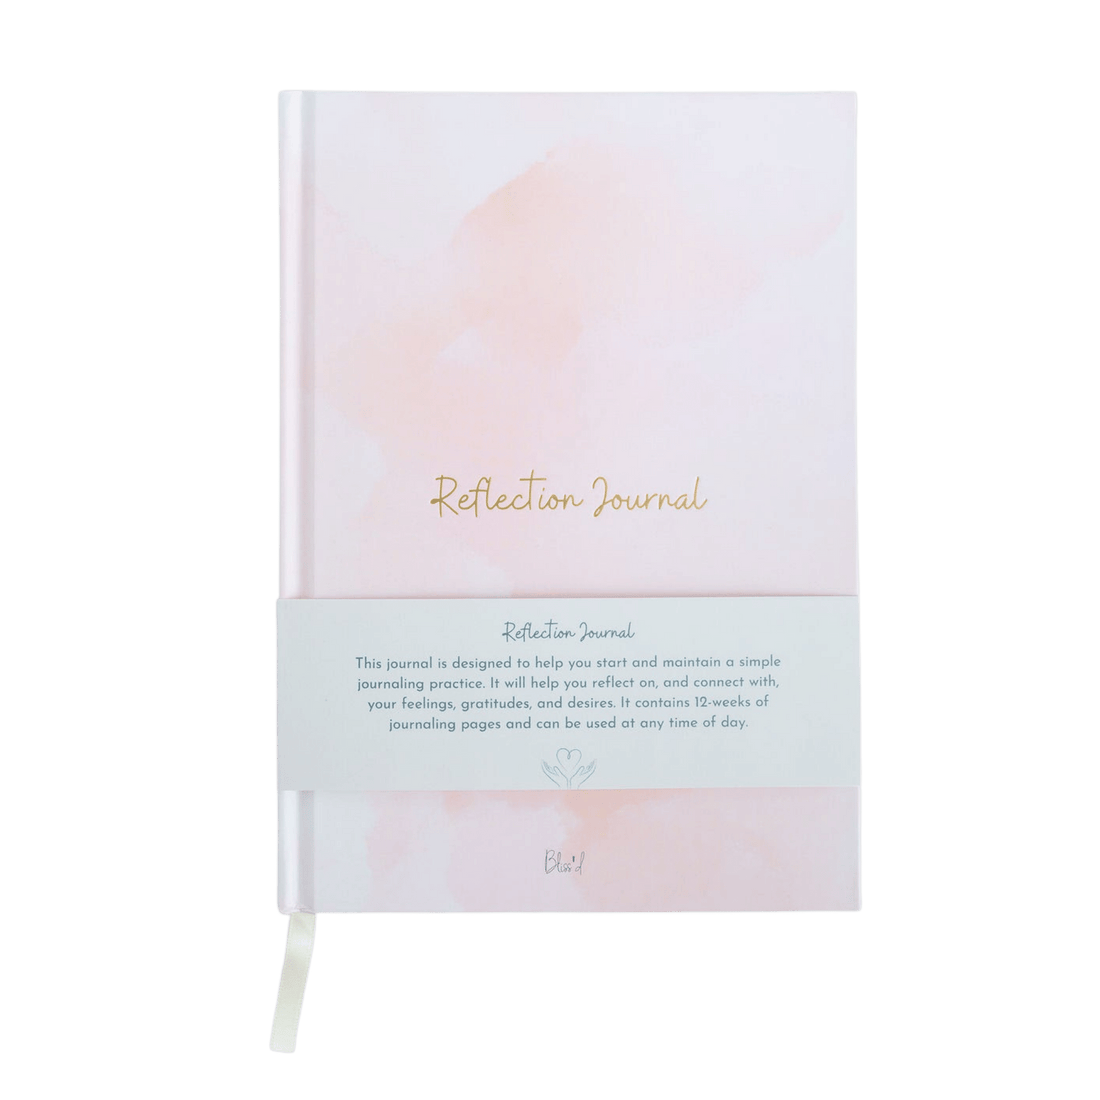 OLD VERSION: Time to Reflect, A 5-Minute Gratitude Journal